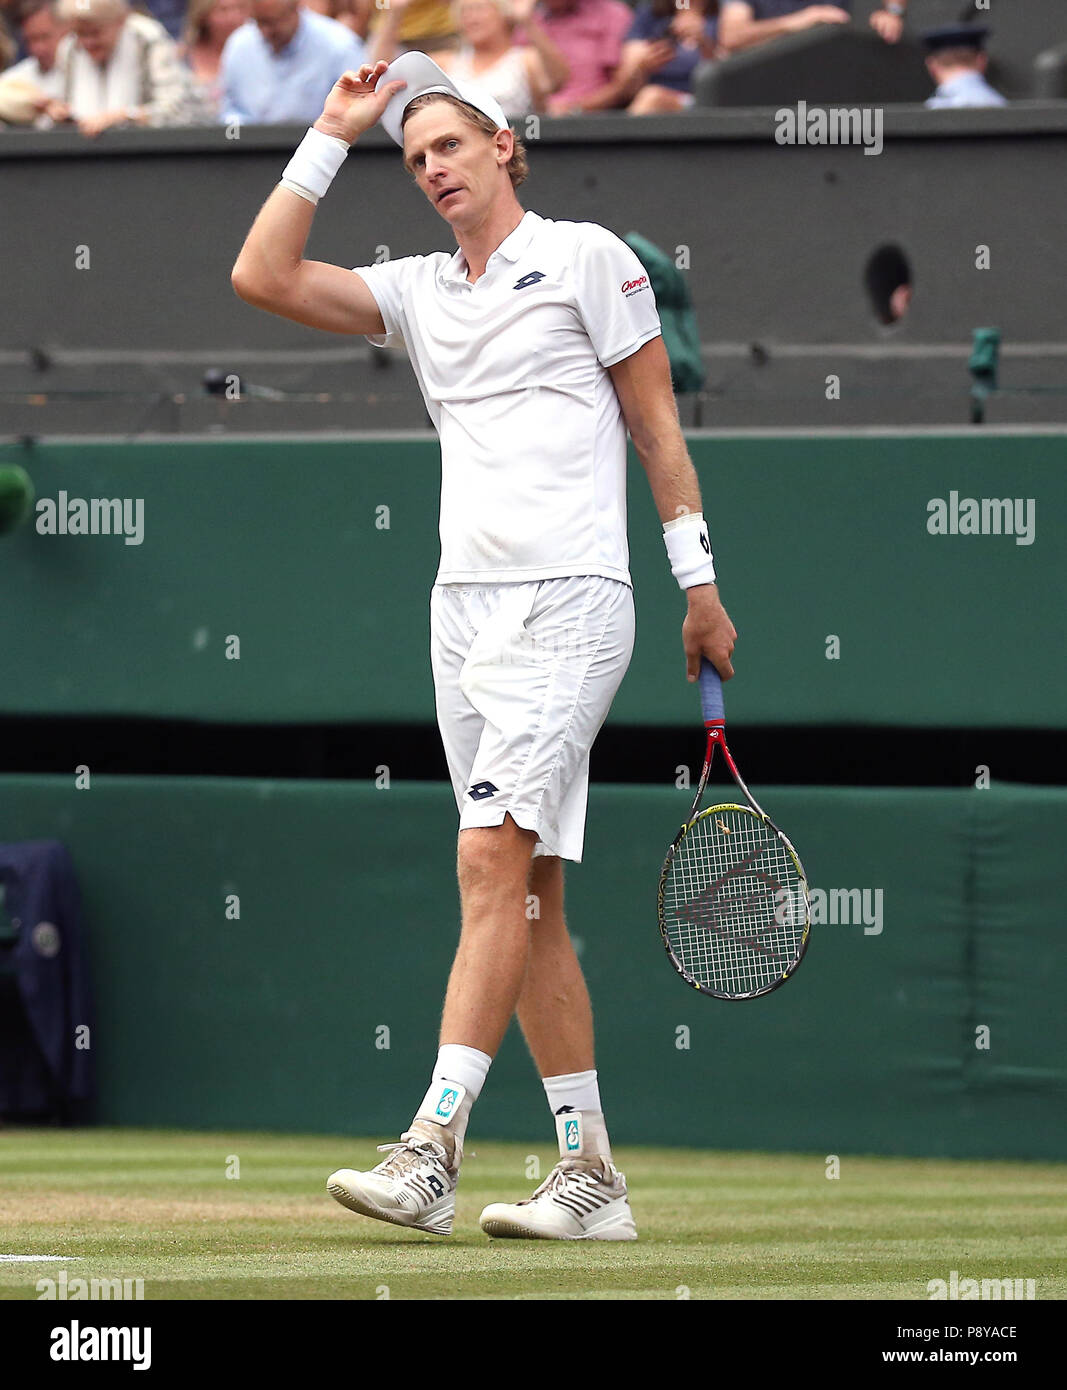 South African eighth seed Kevin Anderson celebrates having reached his first Wimbledon final, beating American ninth seed John Isner 7-6 (8/6) 6-7 (5/7) 6-7 (9/11) 6-4 26-24 in the longest semi-final in the tournament's history on day eleven of the Wimbledon Championships at the All England Lawn tennis and Croquet Club, Wimbledon. Stock Photo